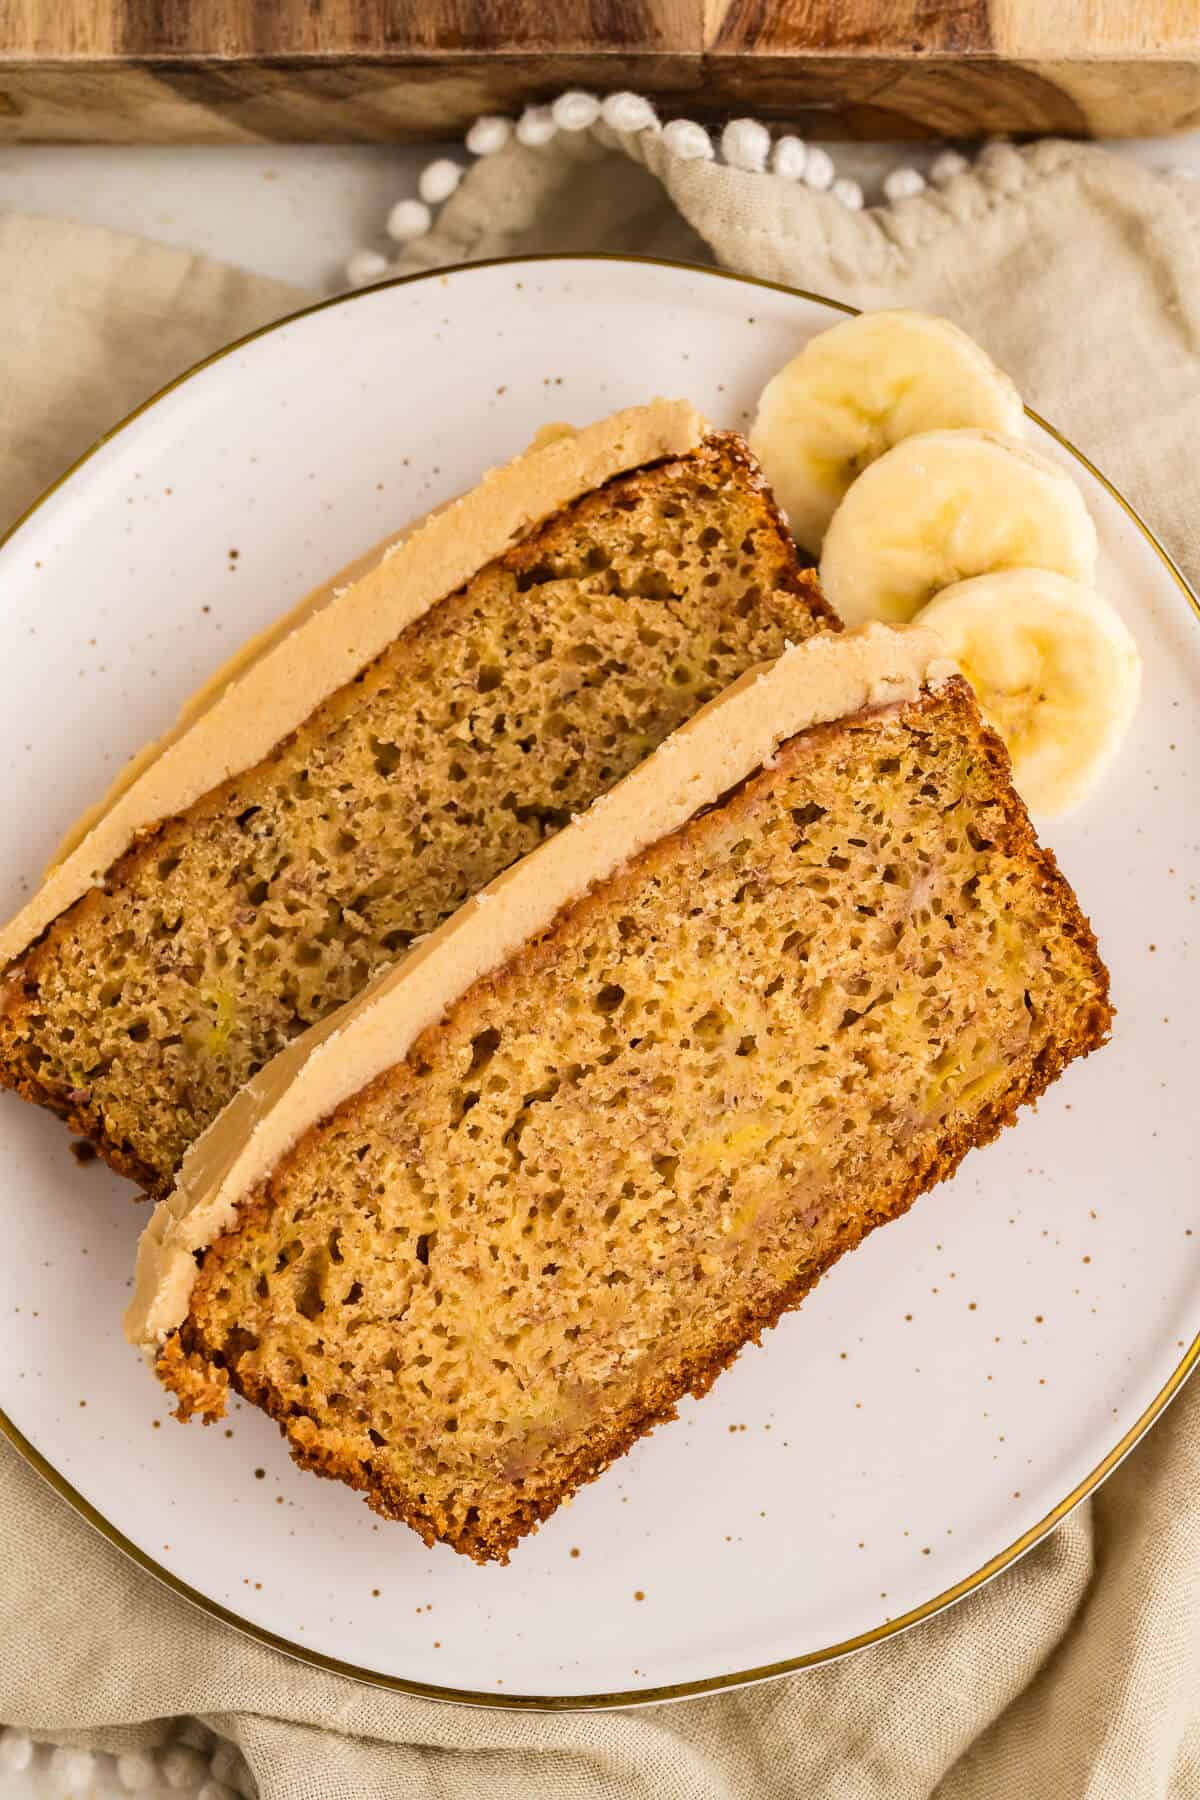 Two slices of banana bread with caramel frosting on a speckled plate, garnished with 3 banana slices on the side.